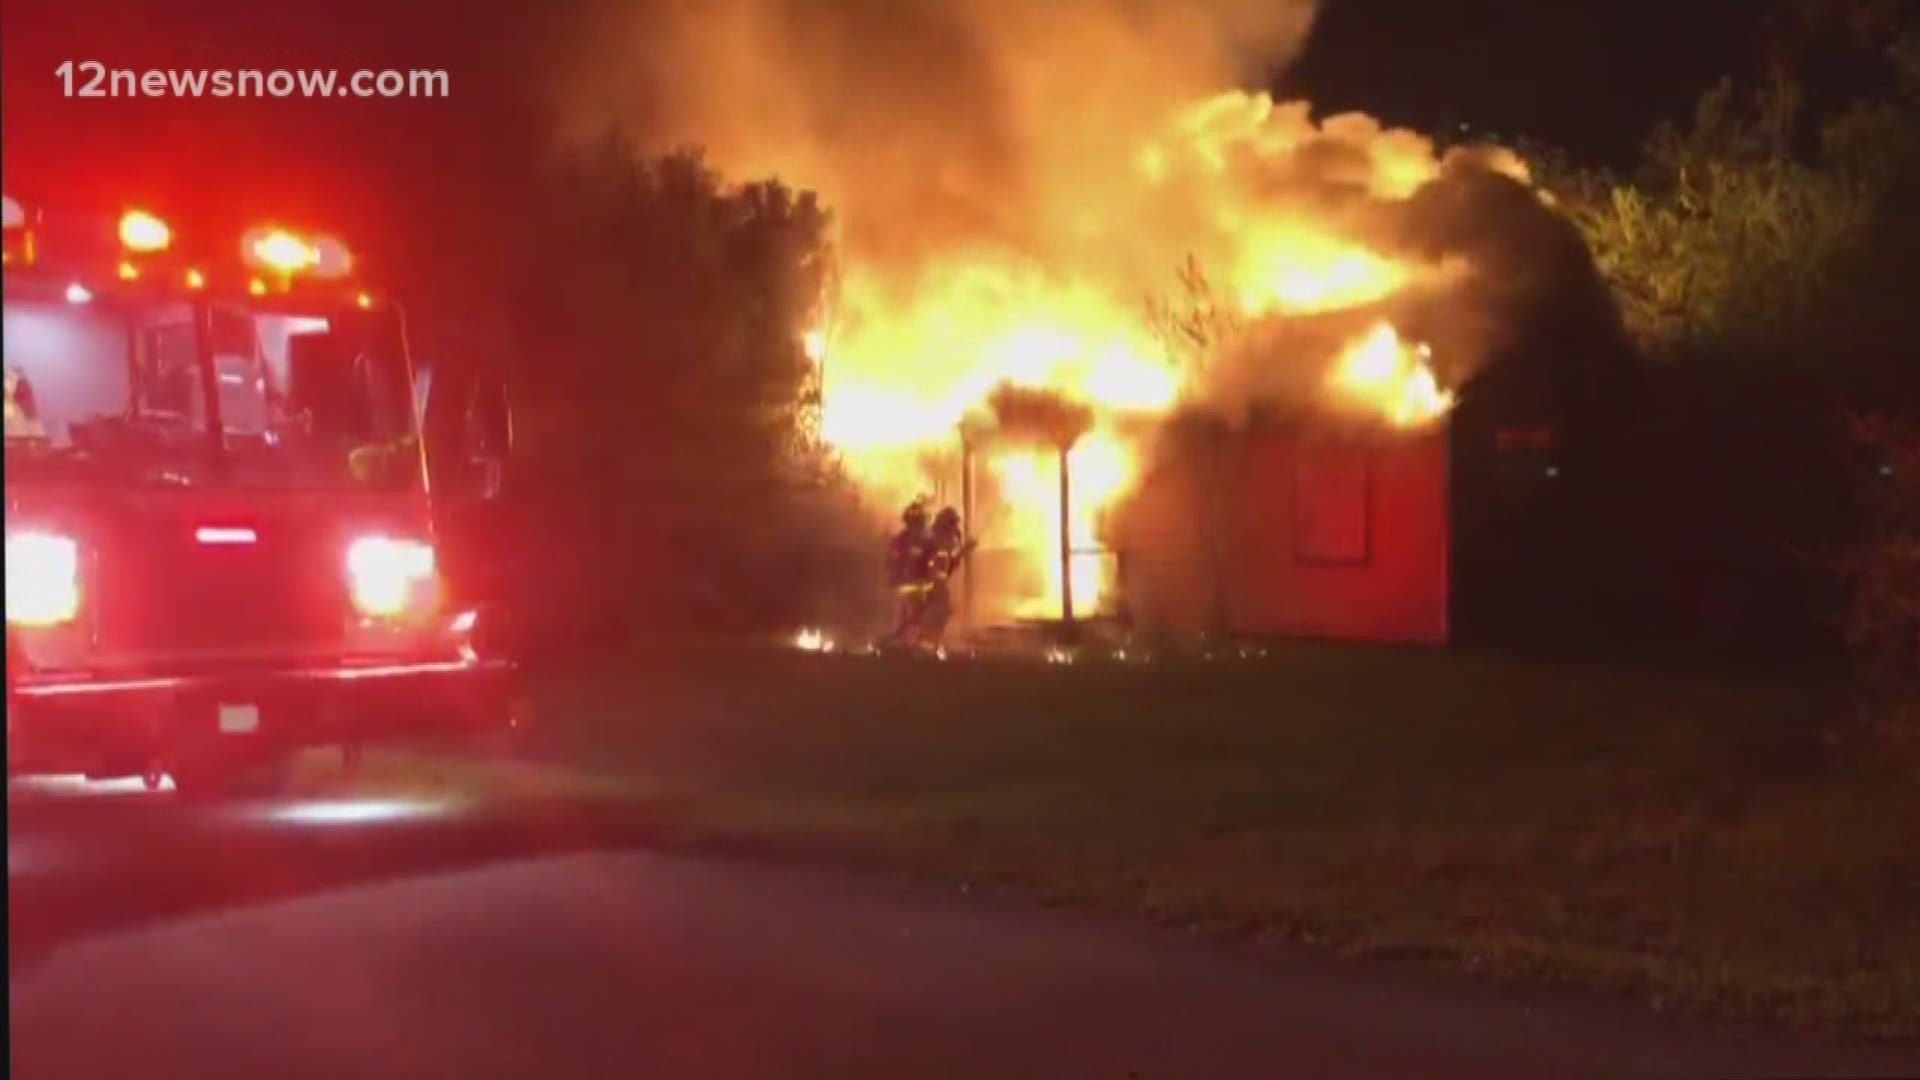 Crews battled the fire at the Massachusetts Street home on Saturday around 3 a.m.